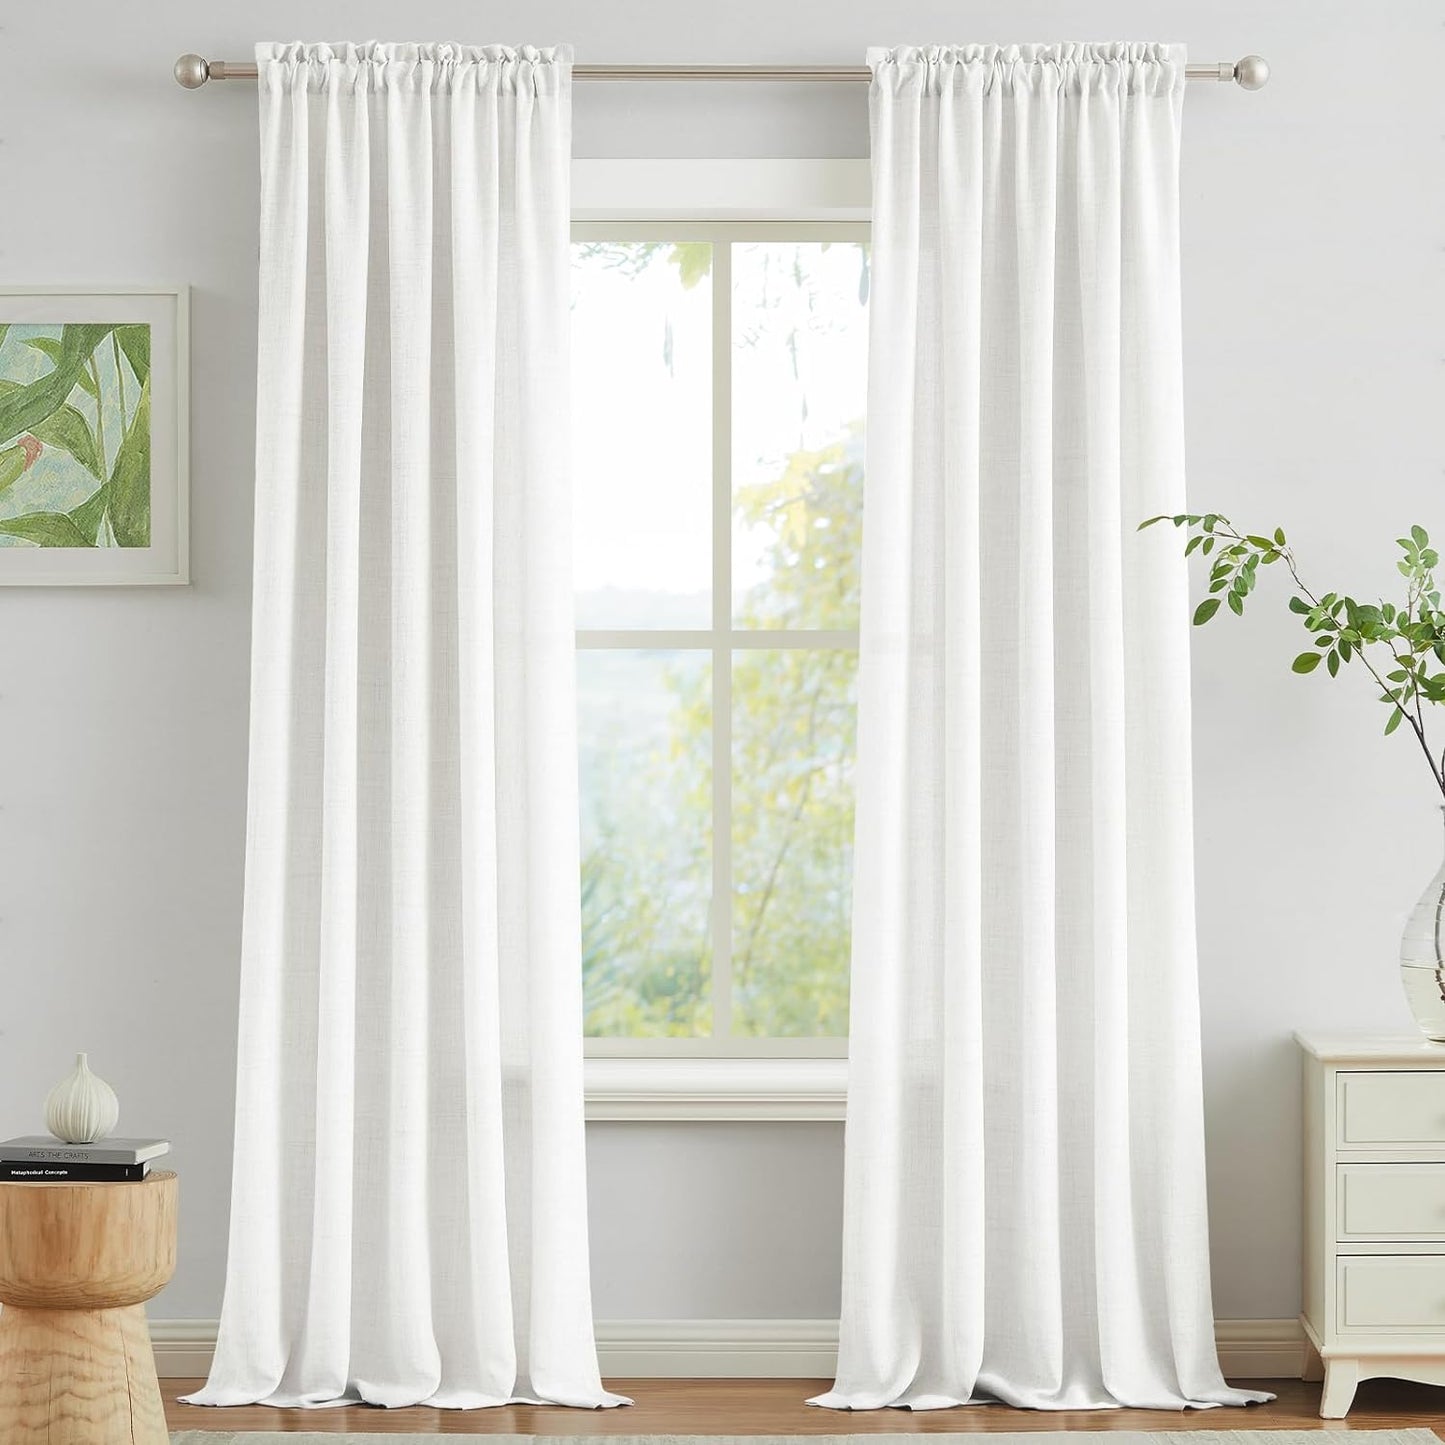 Melodieux Linen Curtains 84 Inches Long for Bedroom - Rod Pocket Burlap Linen Textured Semi Sheer Curtains Light Filtering Privacy Farmhouse Living Room Drapes (Set of 2, 52Inch X 84Inch, Beige)  Melodieux White W52" X L108" 